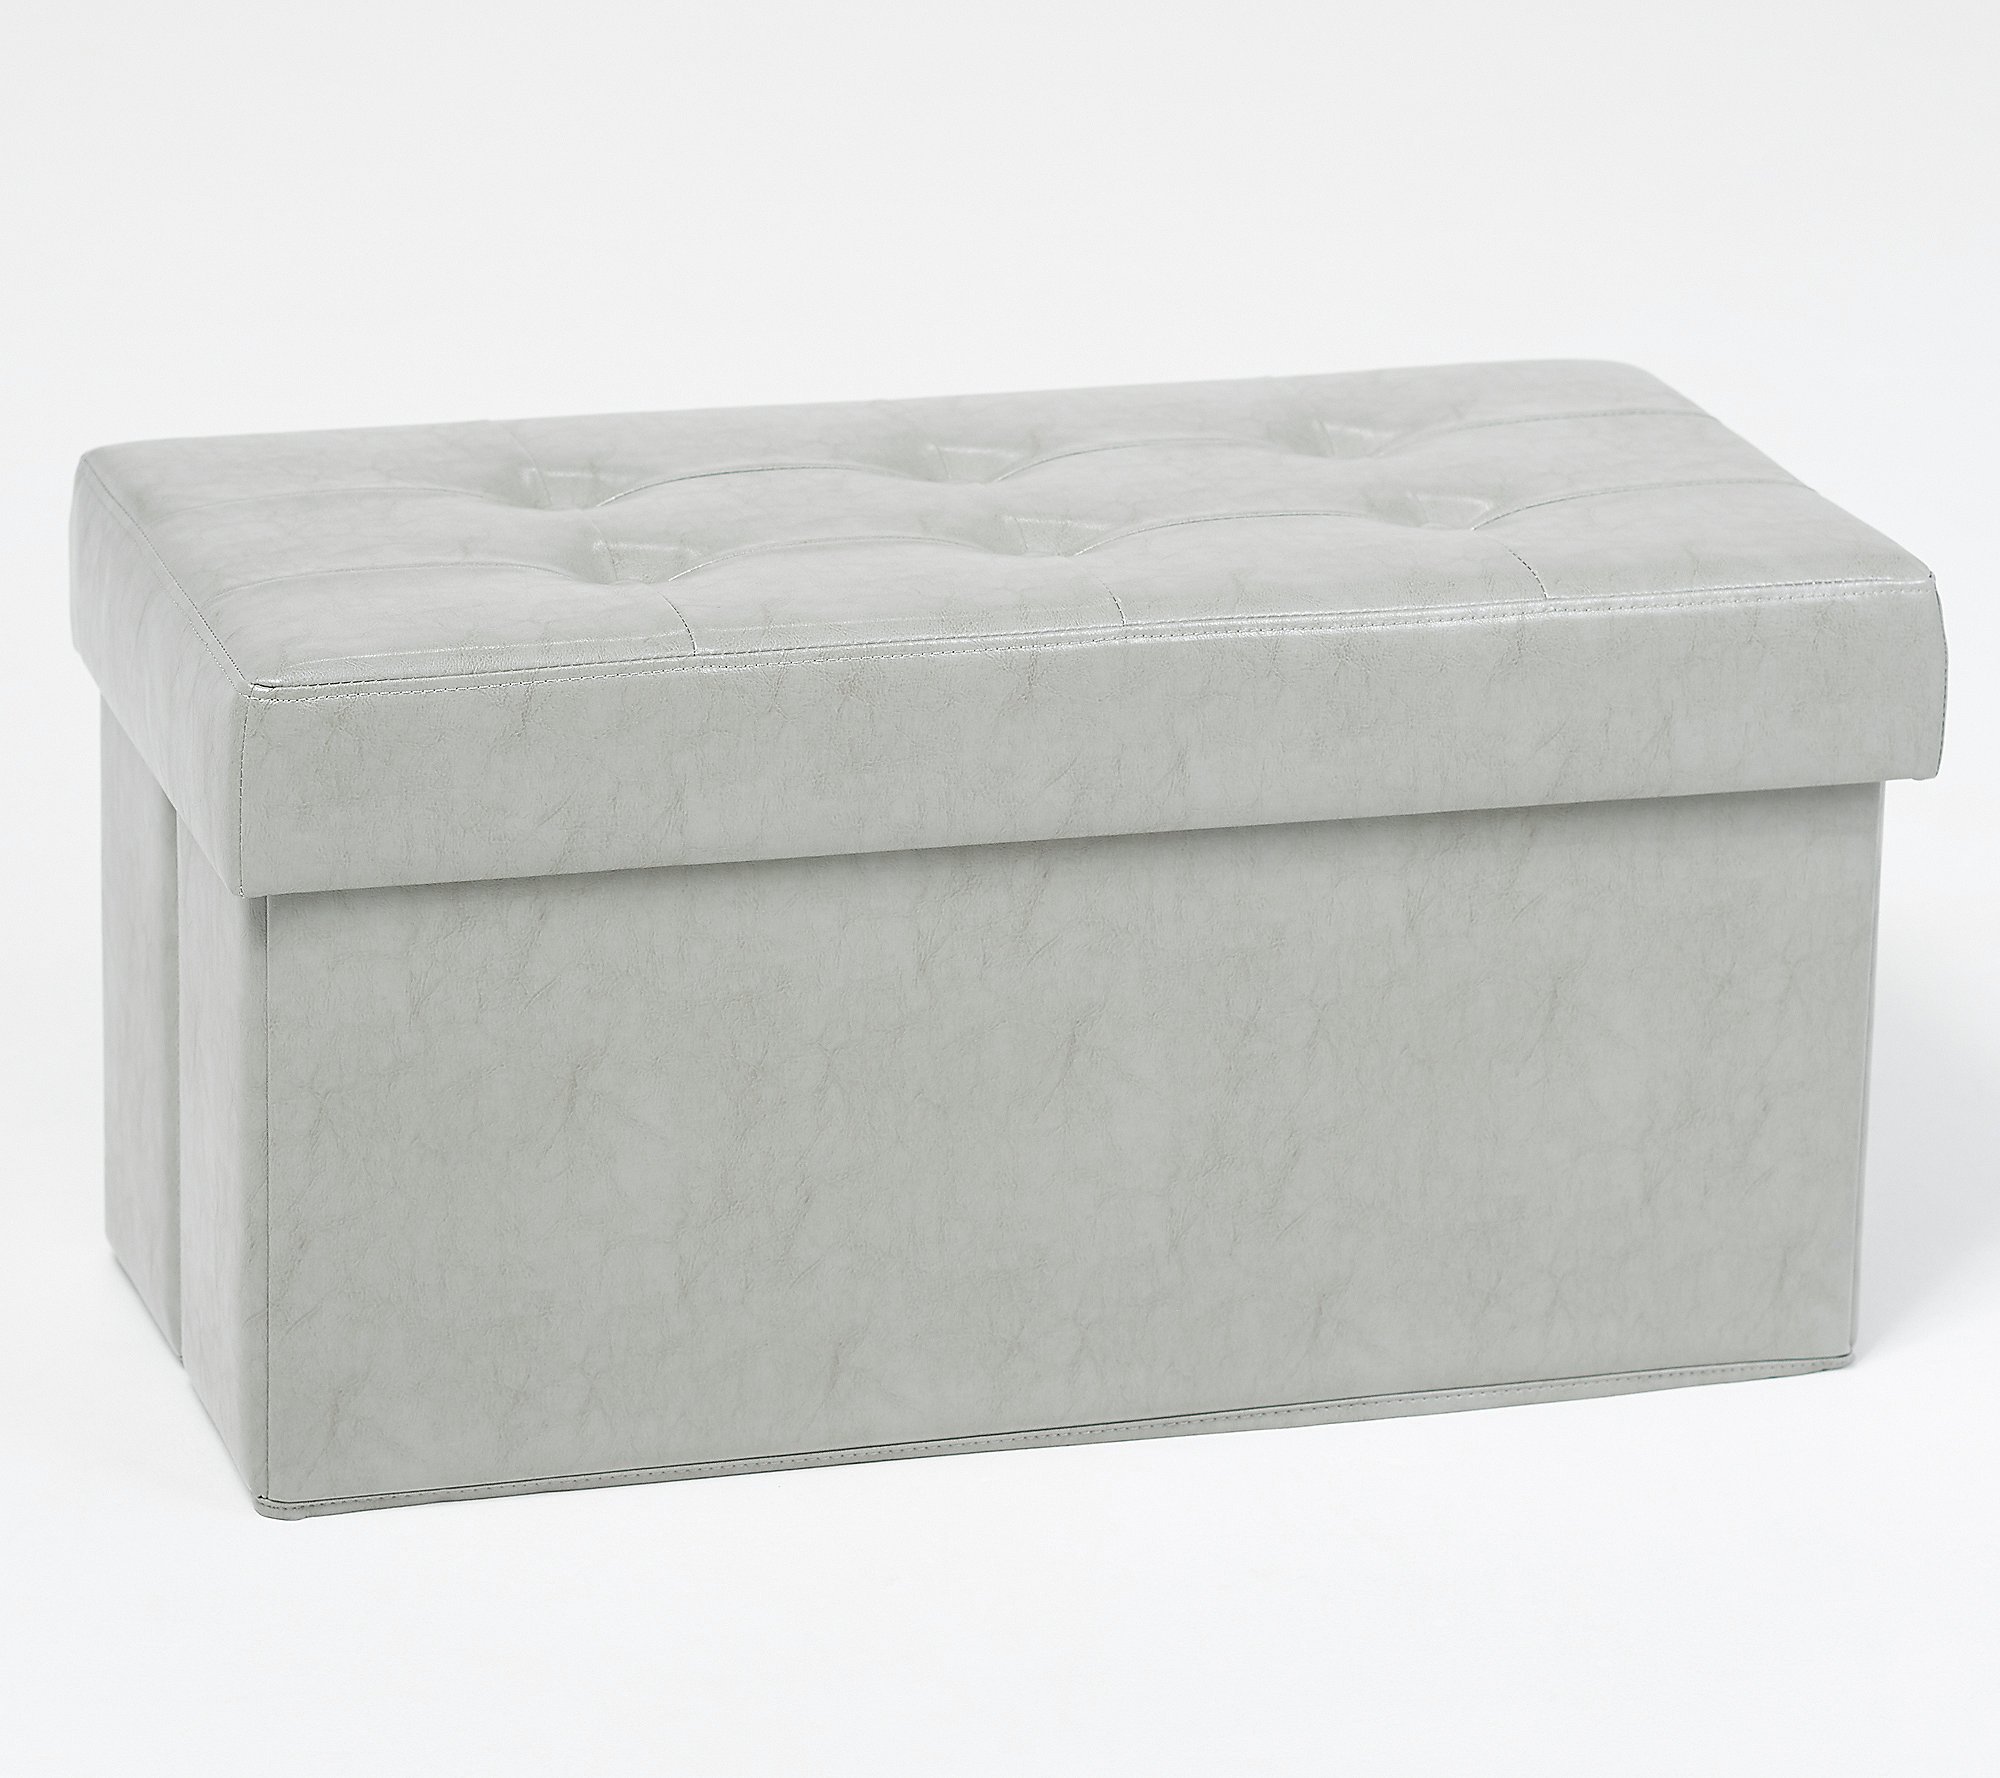 Faux Leather Tufted Collapsible Bench W, White Faux Leather Ottoman Storage Box